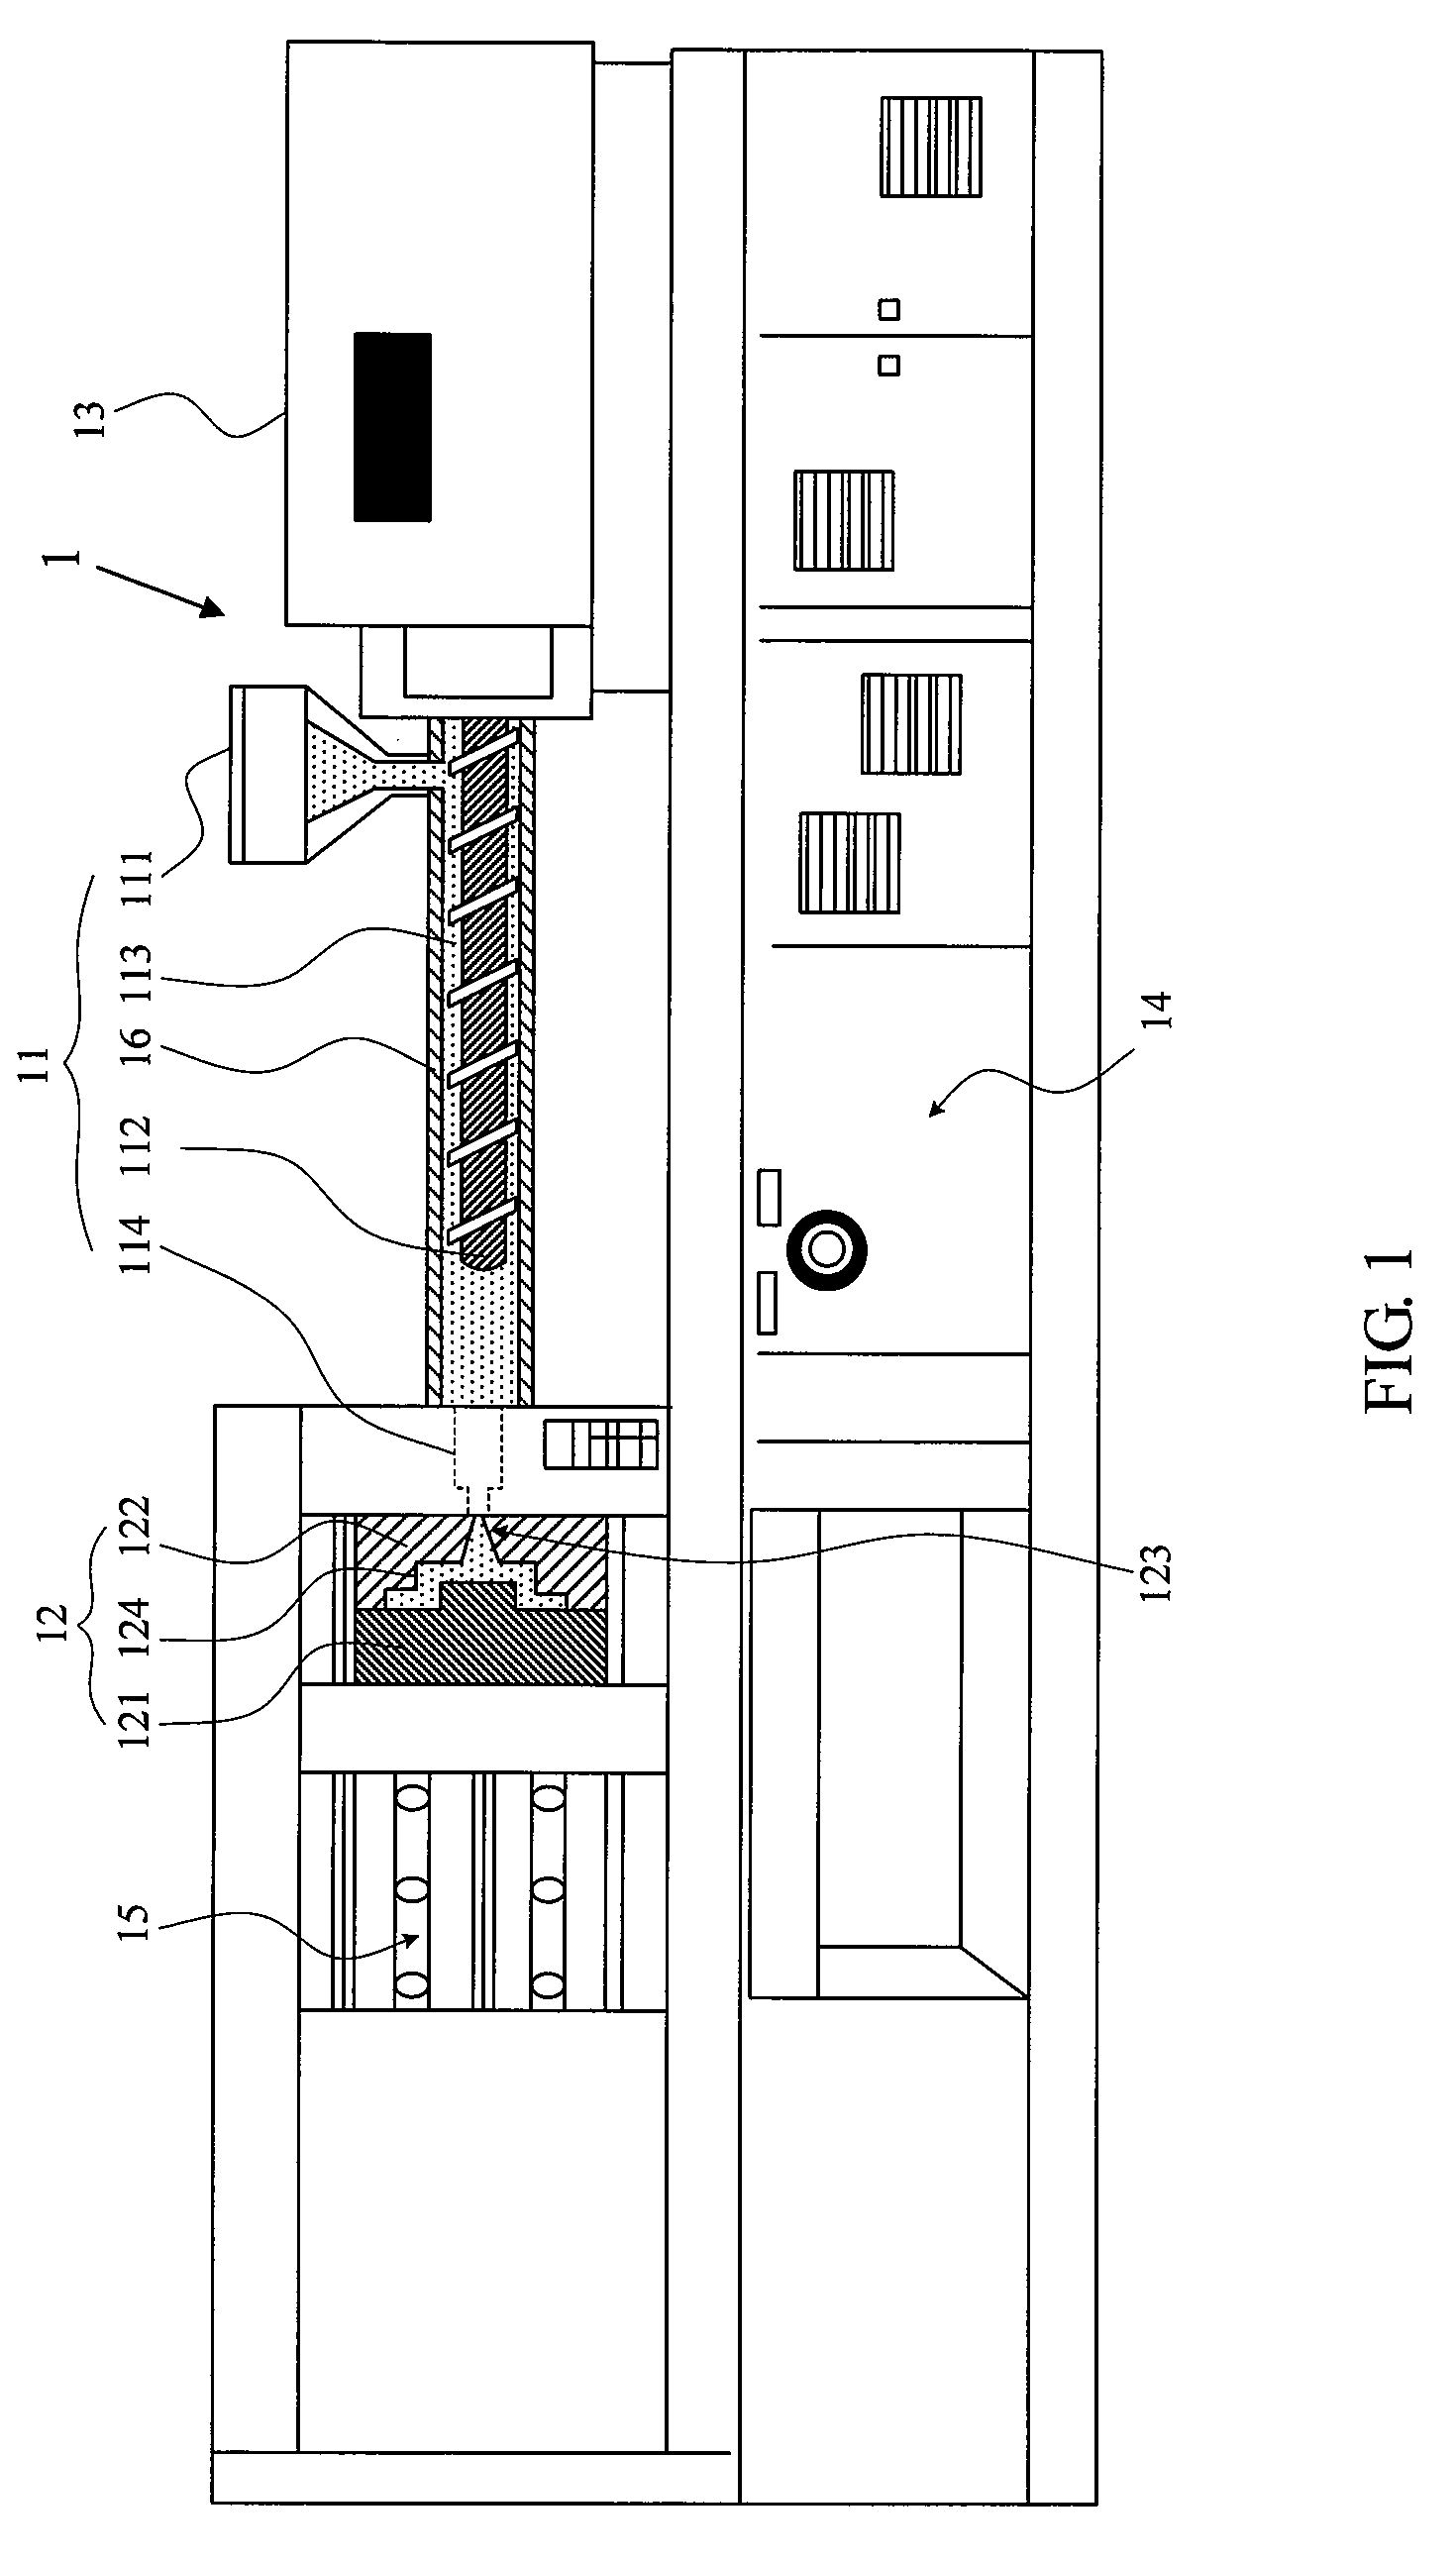 Injection molding machine having a heat insulated barrel